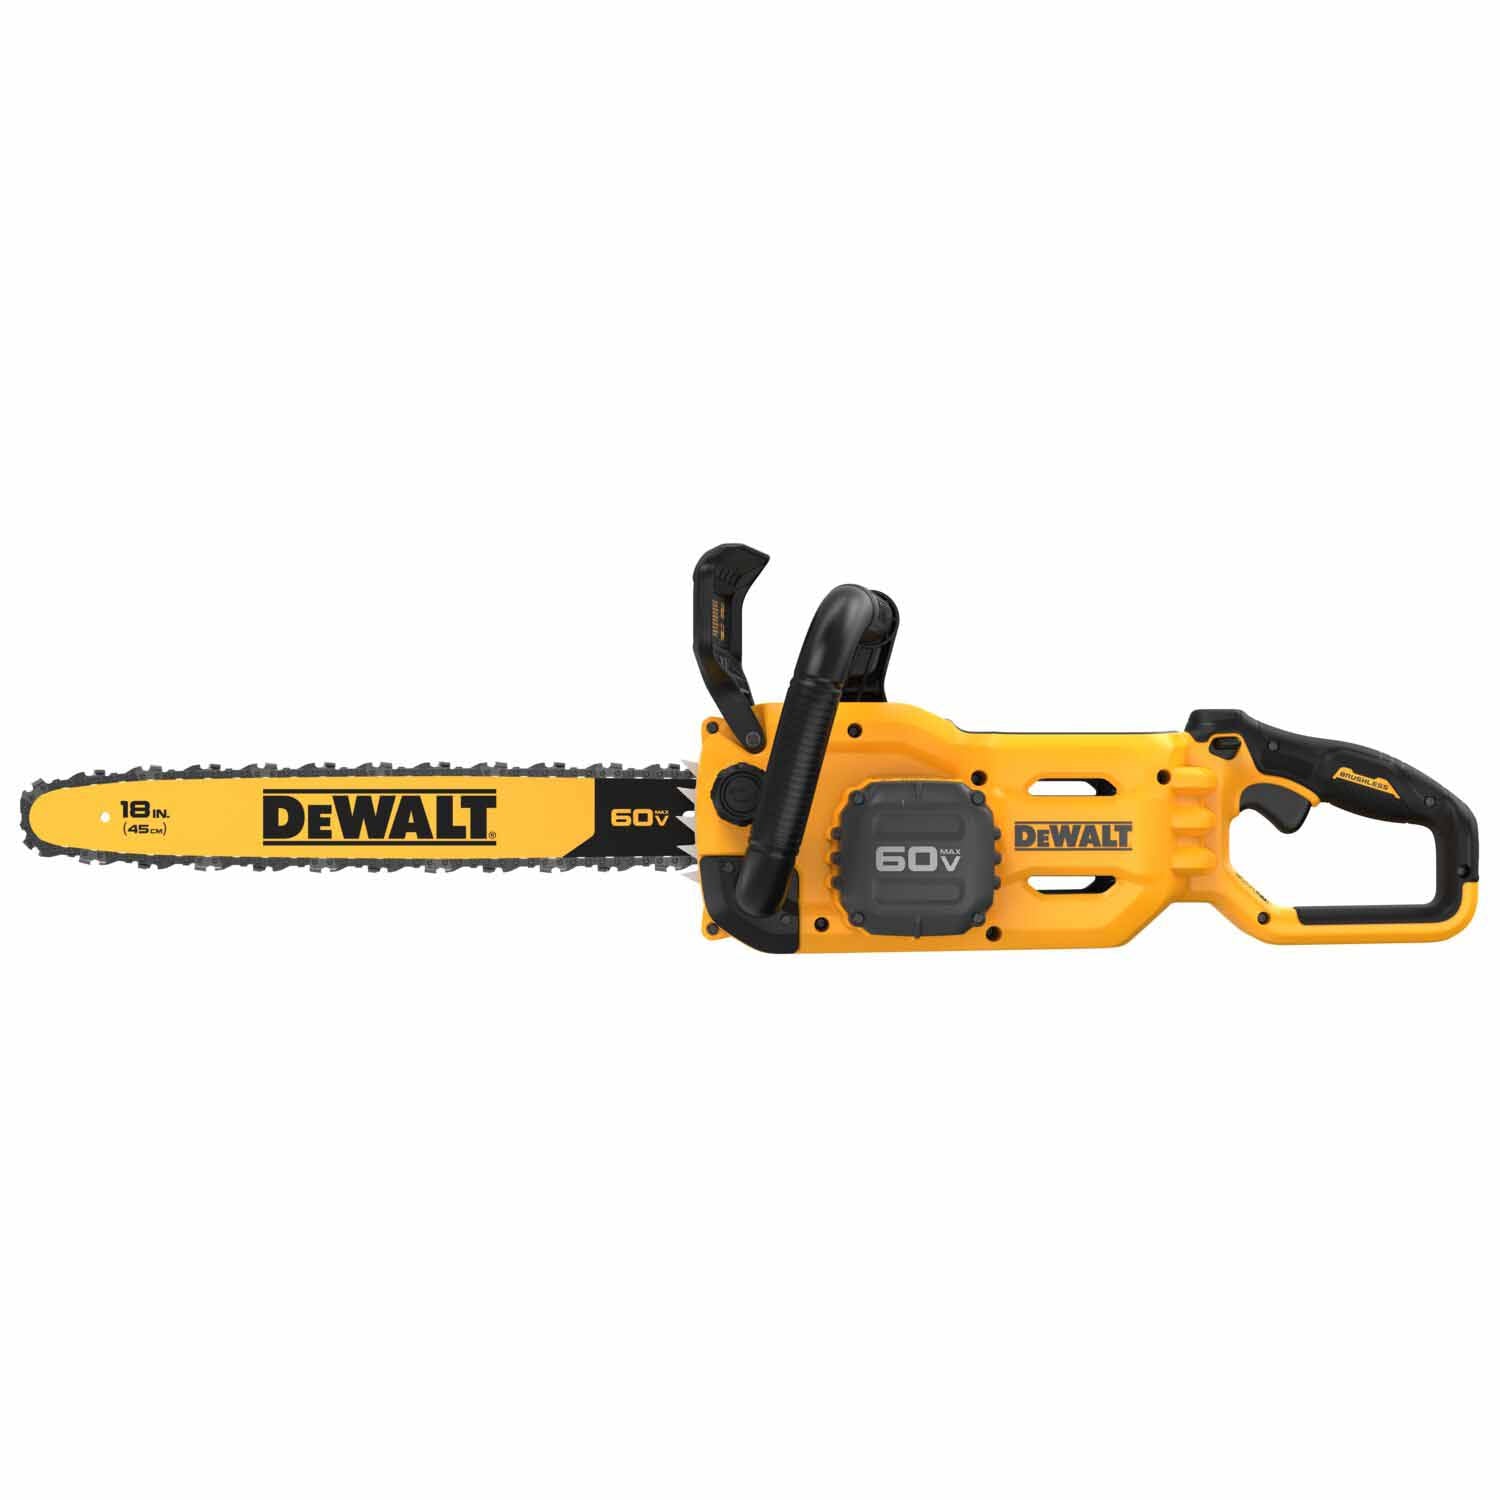 DeWalt DCCS672B 60V MAX* 18" Brushless Cordless Chainsaw, Tool Only